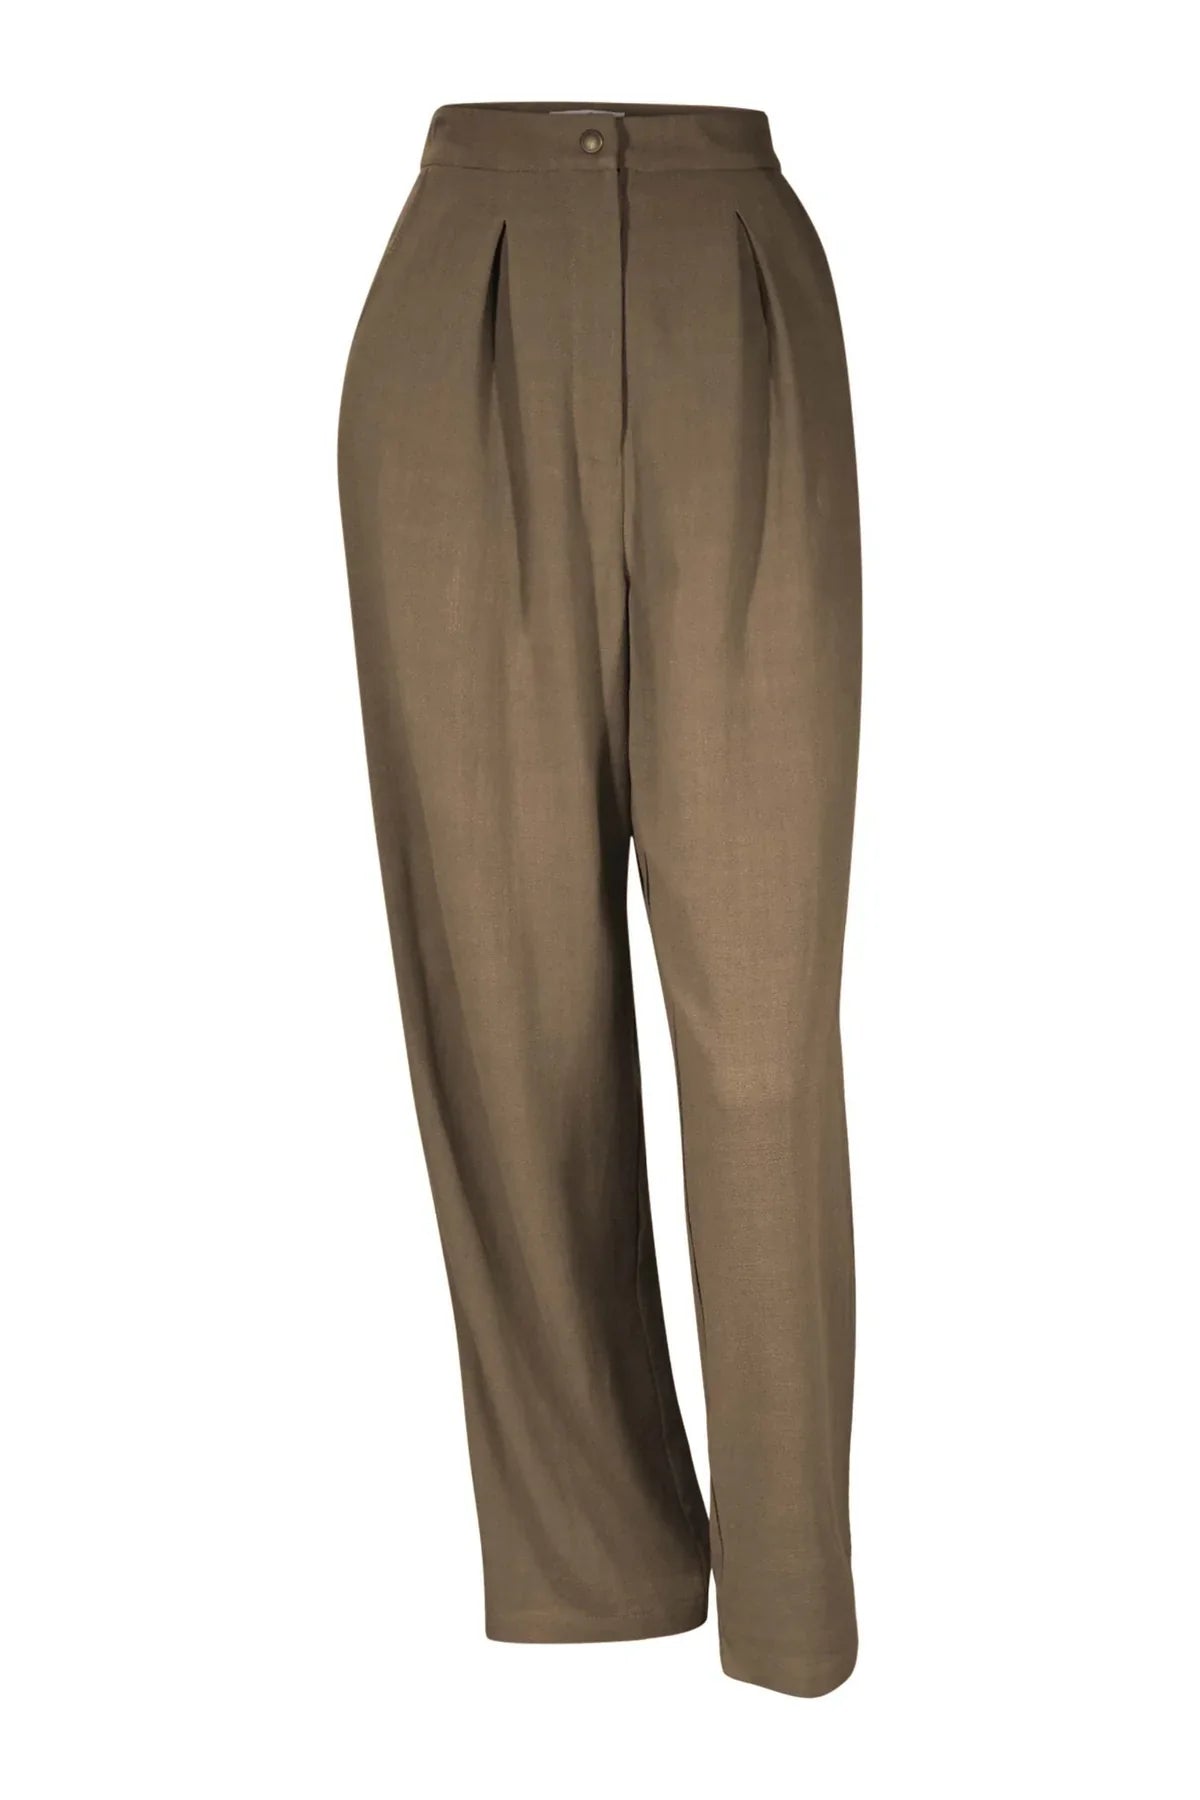 Melow Harrisson Pant in Sand Fall 23/24